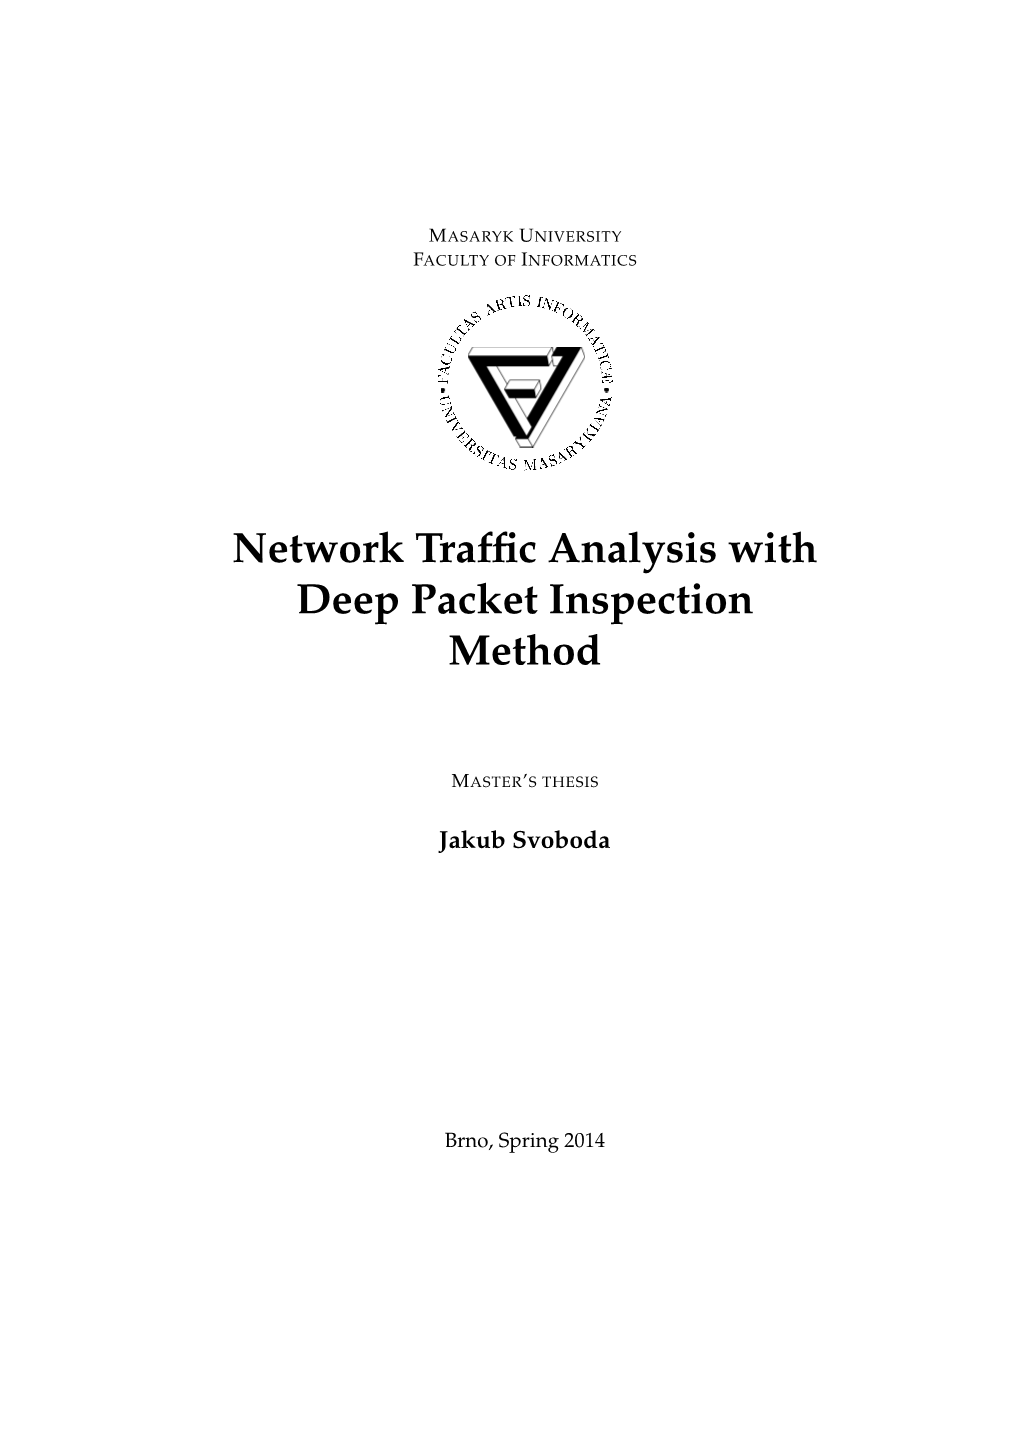 Network Traffic Analysis with Deep Packet Inspection Method